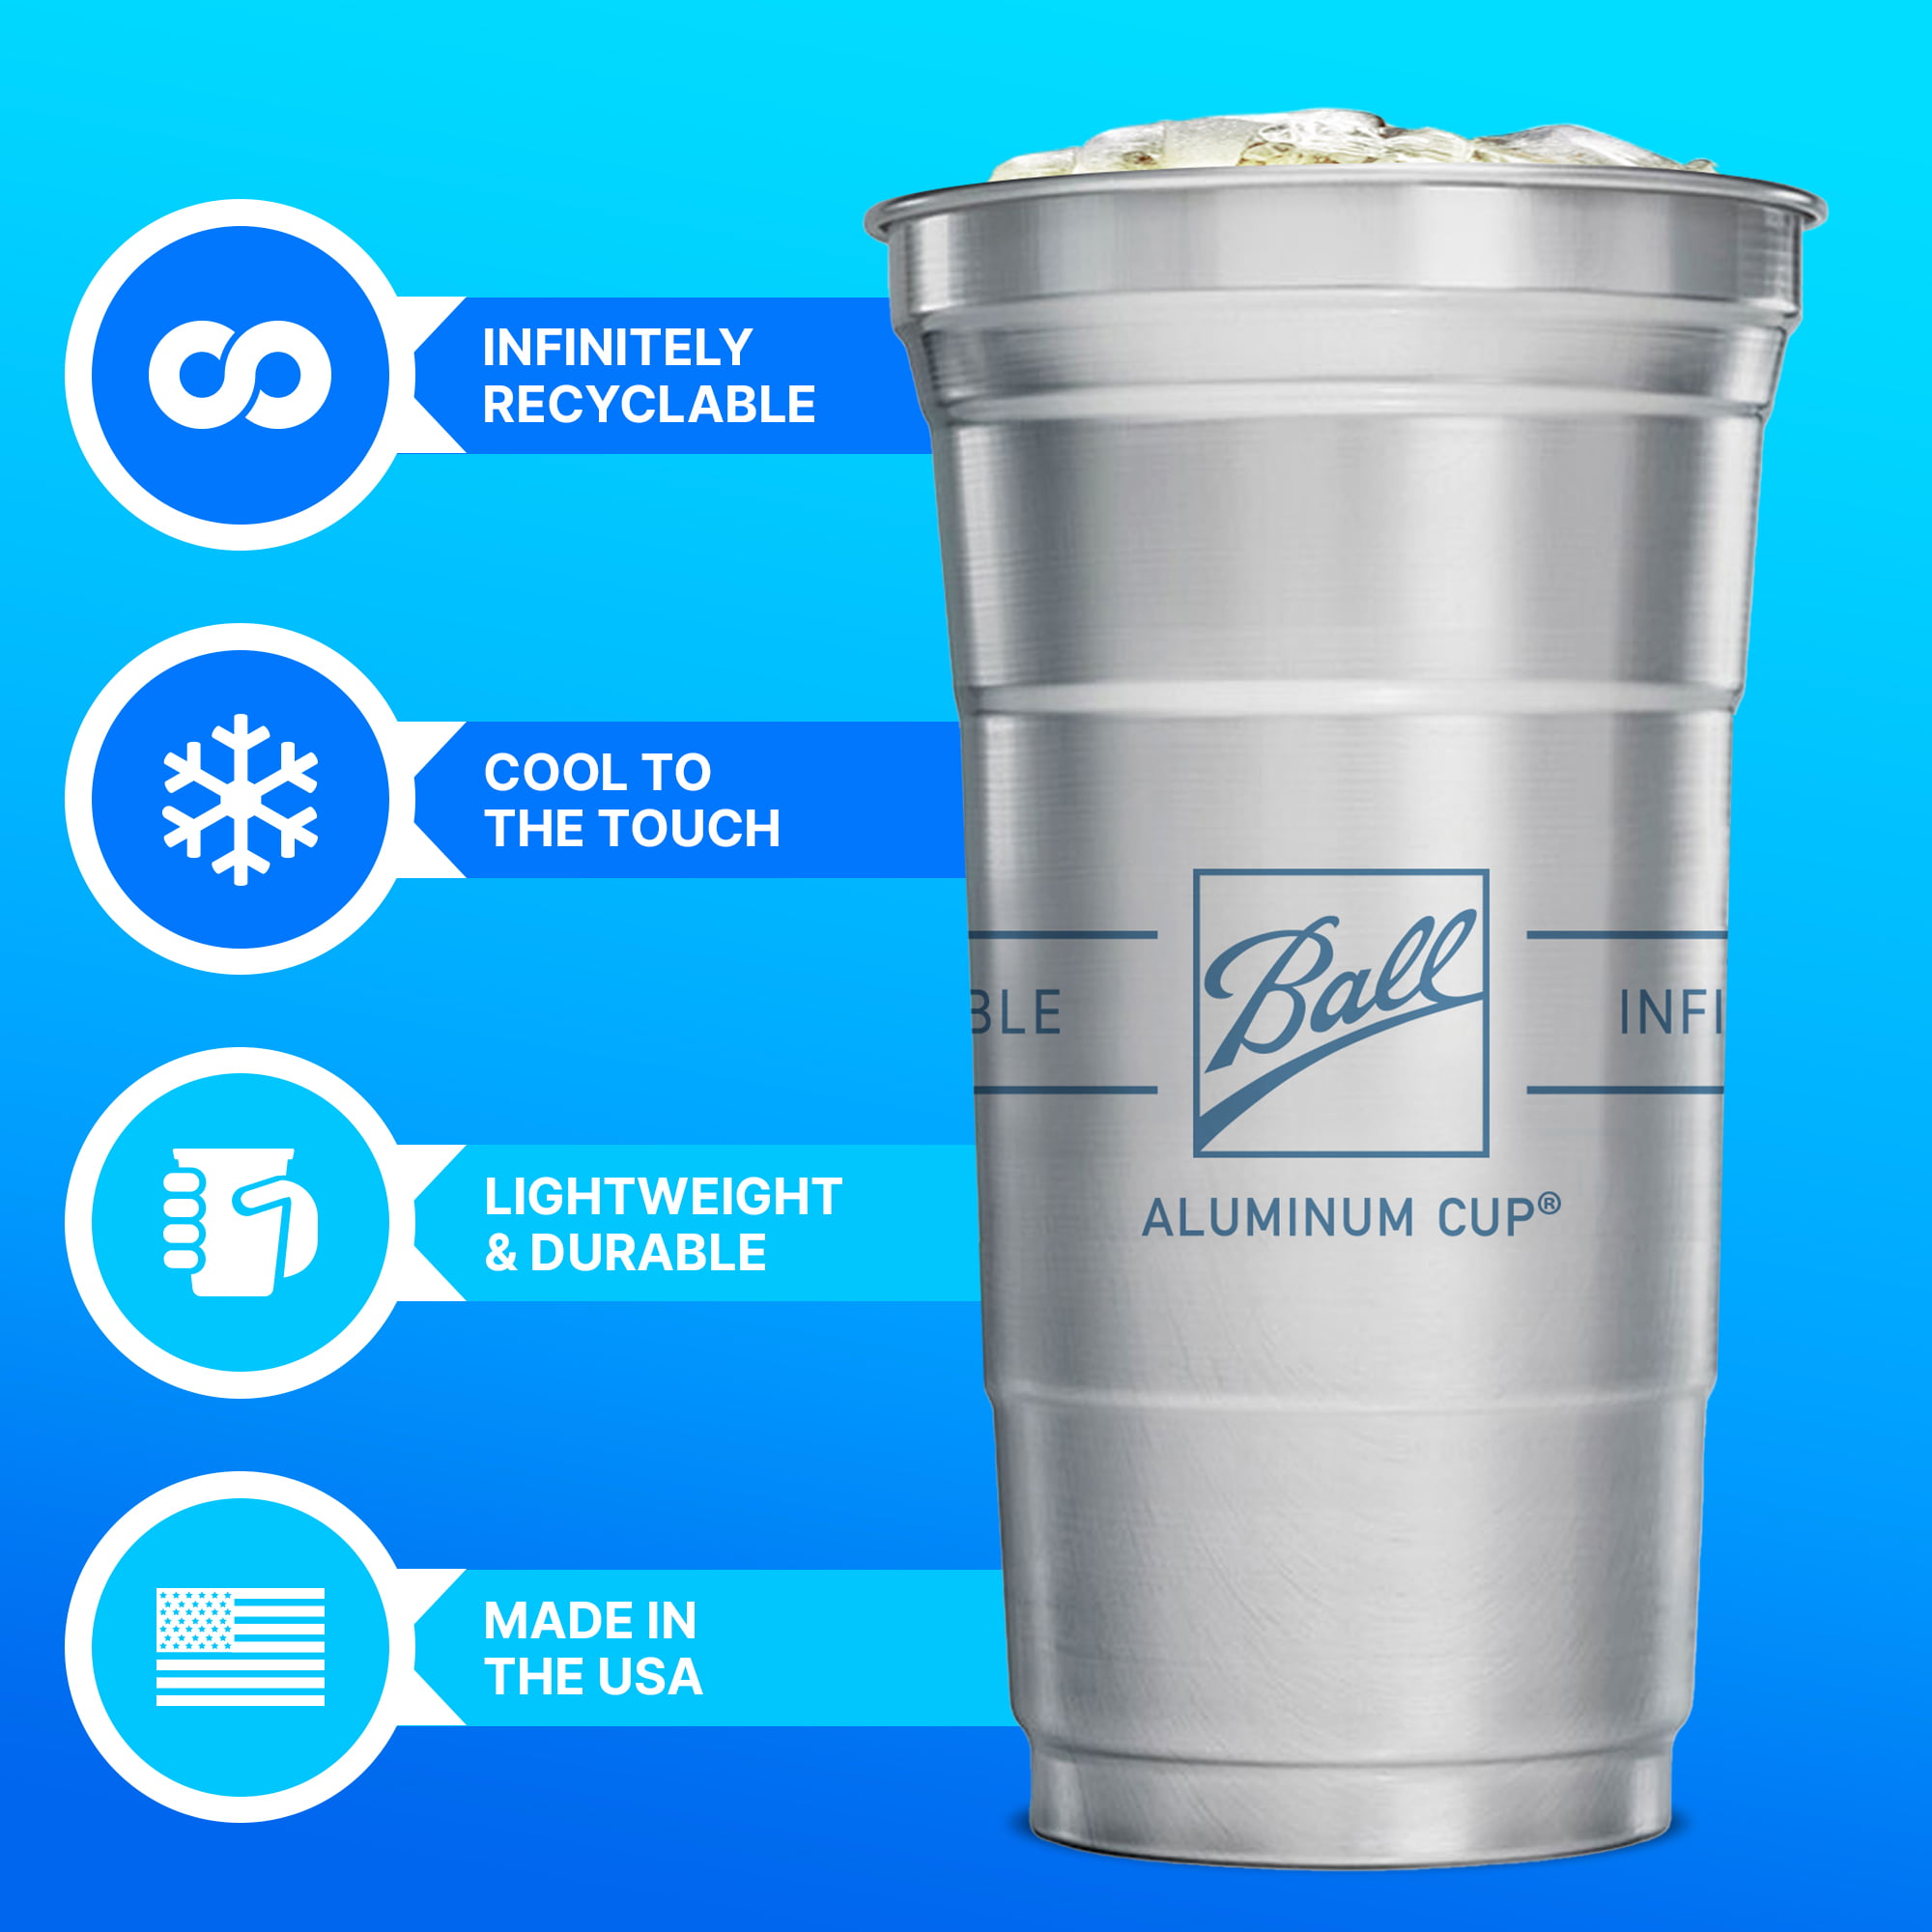 Ball Aluminum Cup™ Refillable Recycable Cold Drink Cup, 18 ct - Kroger